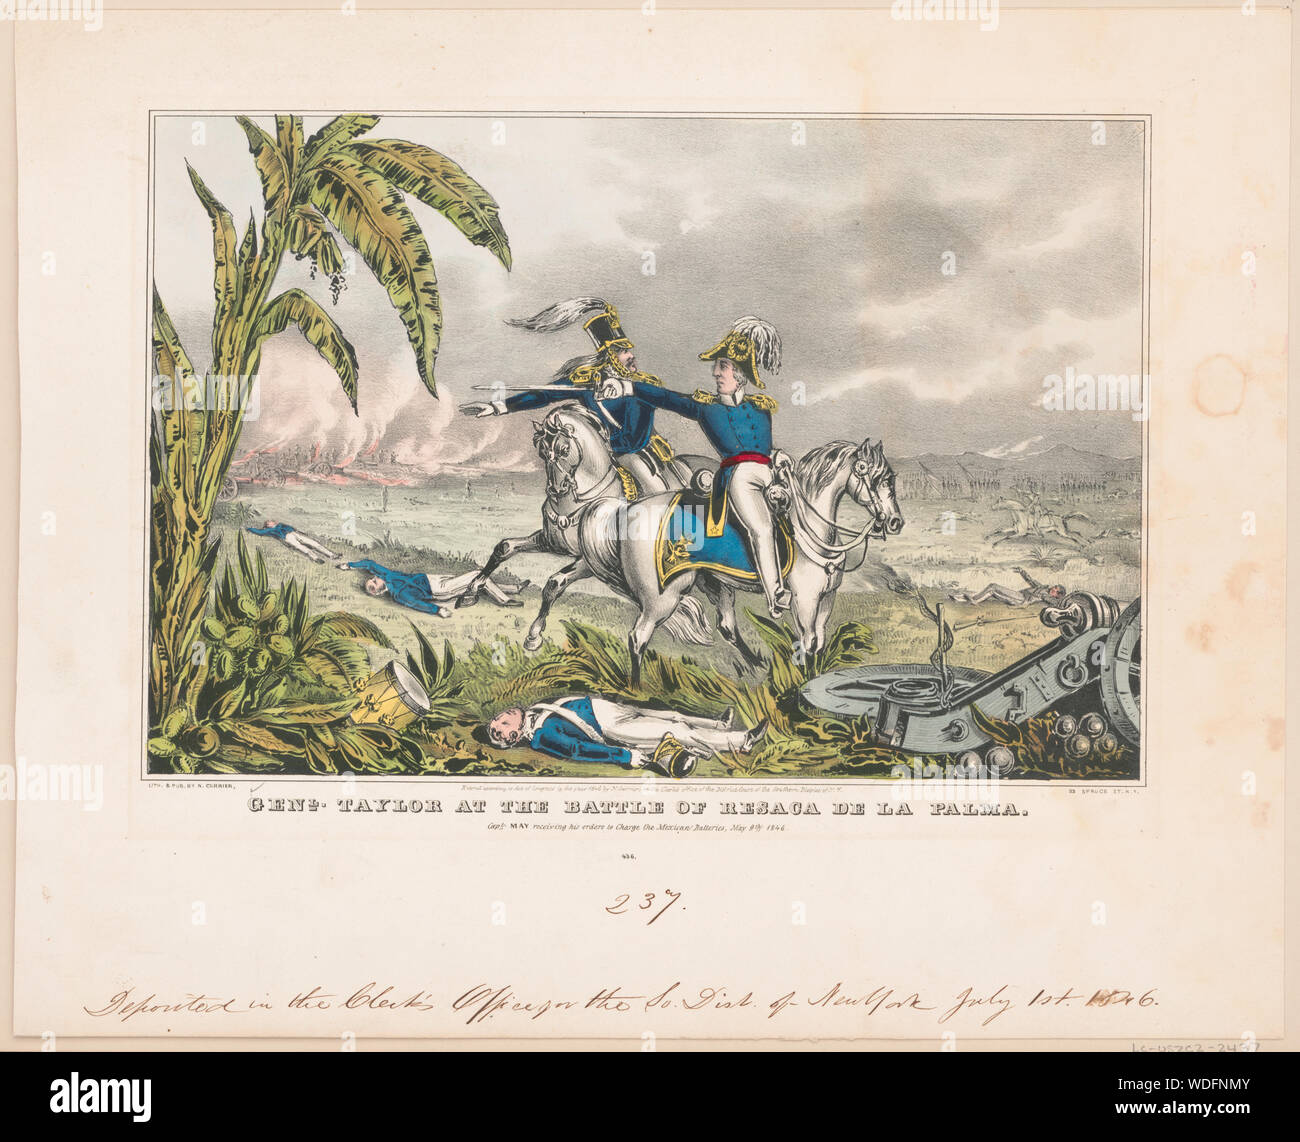 Genl. Taylor at the battle of Resaca de la Palma Capt. May receiving his orders to charge the Mexican batteries, May 9th 1846. Abstract: 1 print : lithograph, hand-colored. Stock Photo